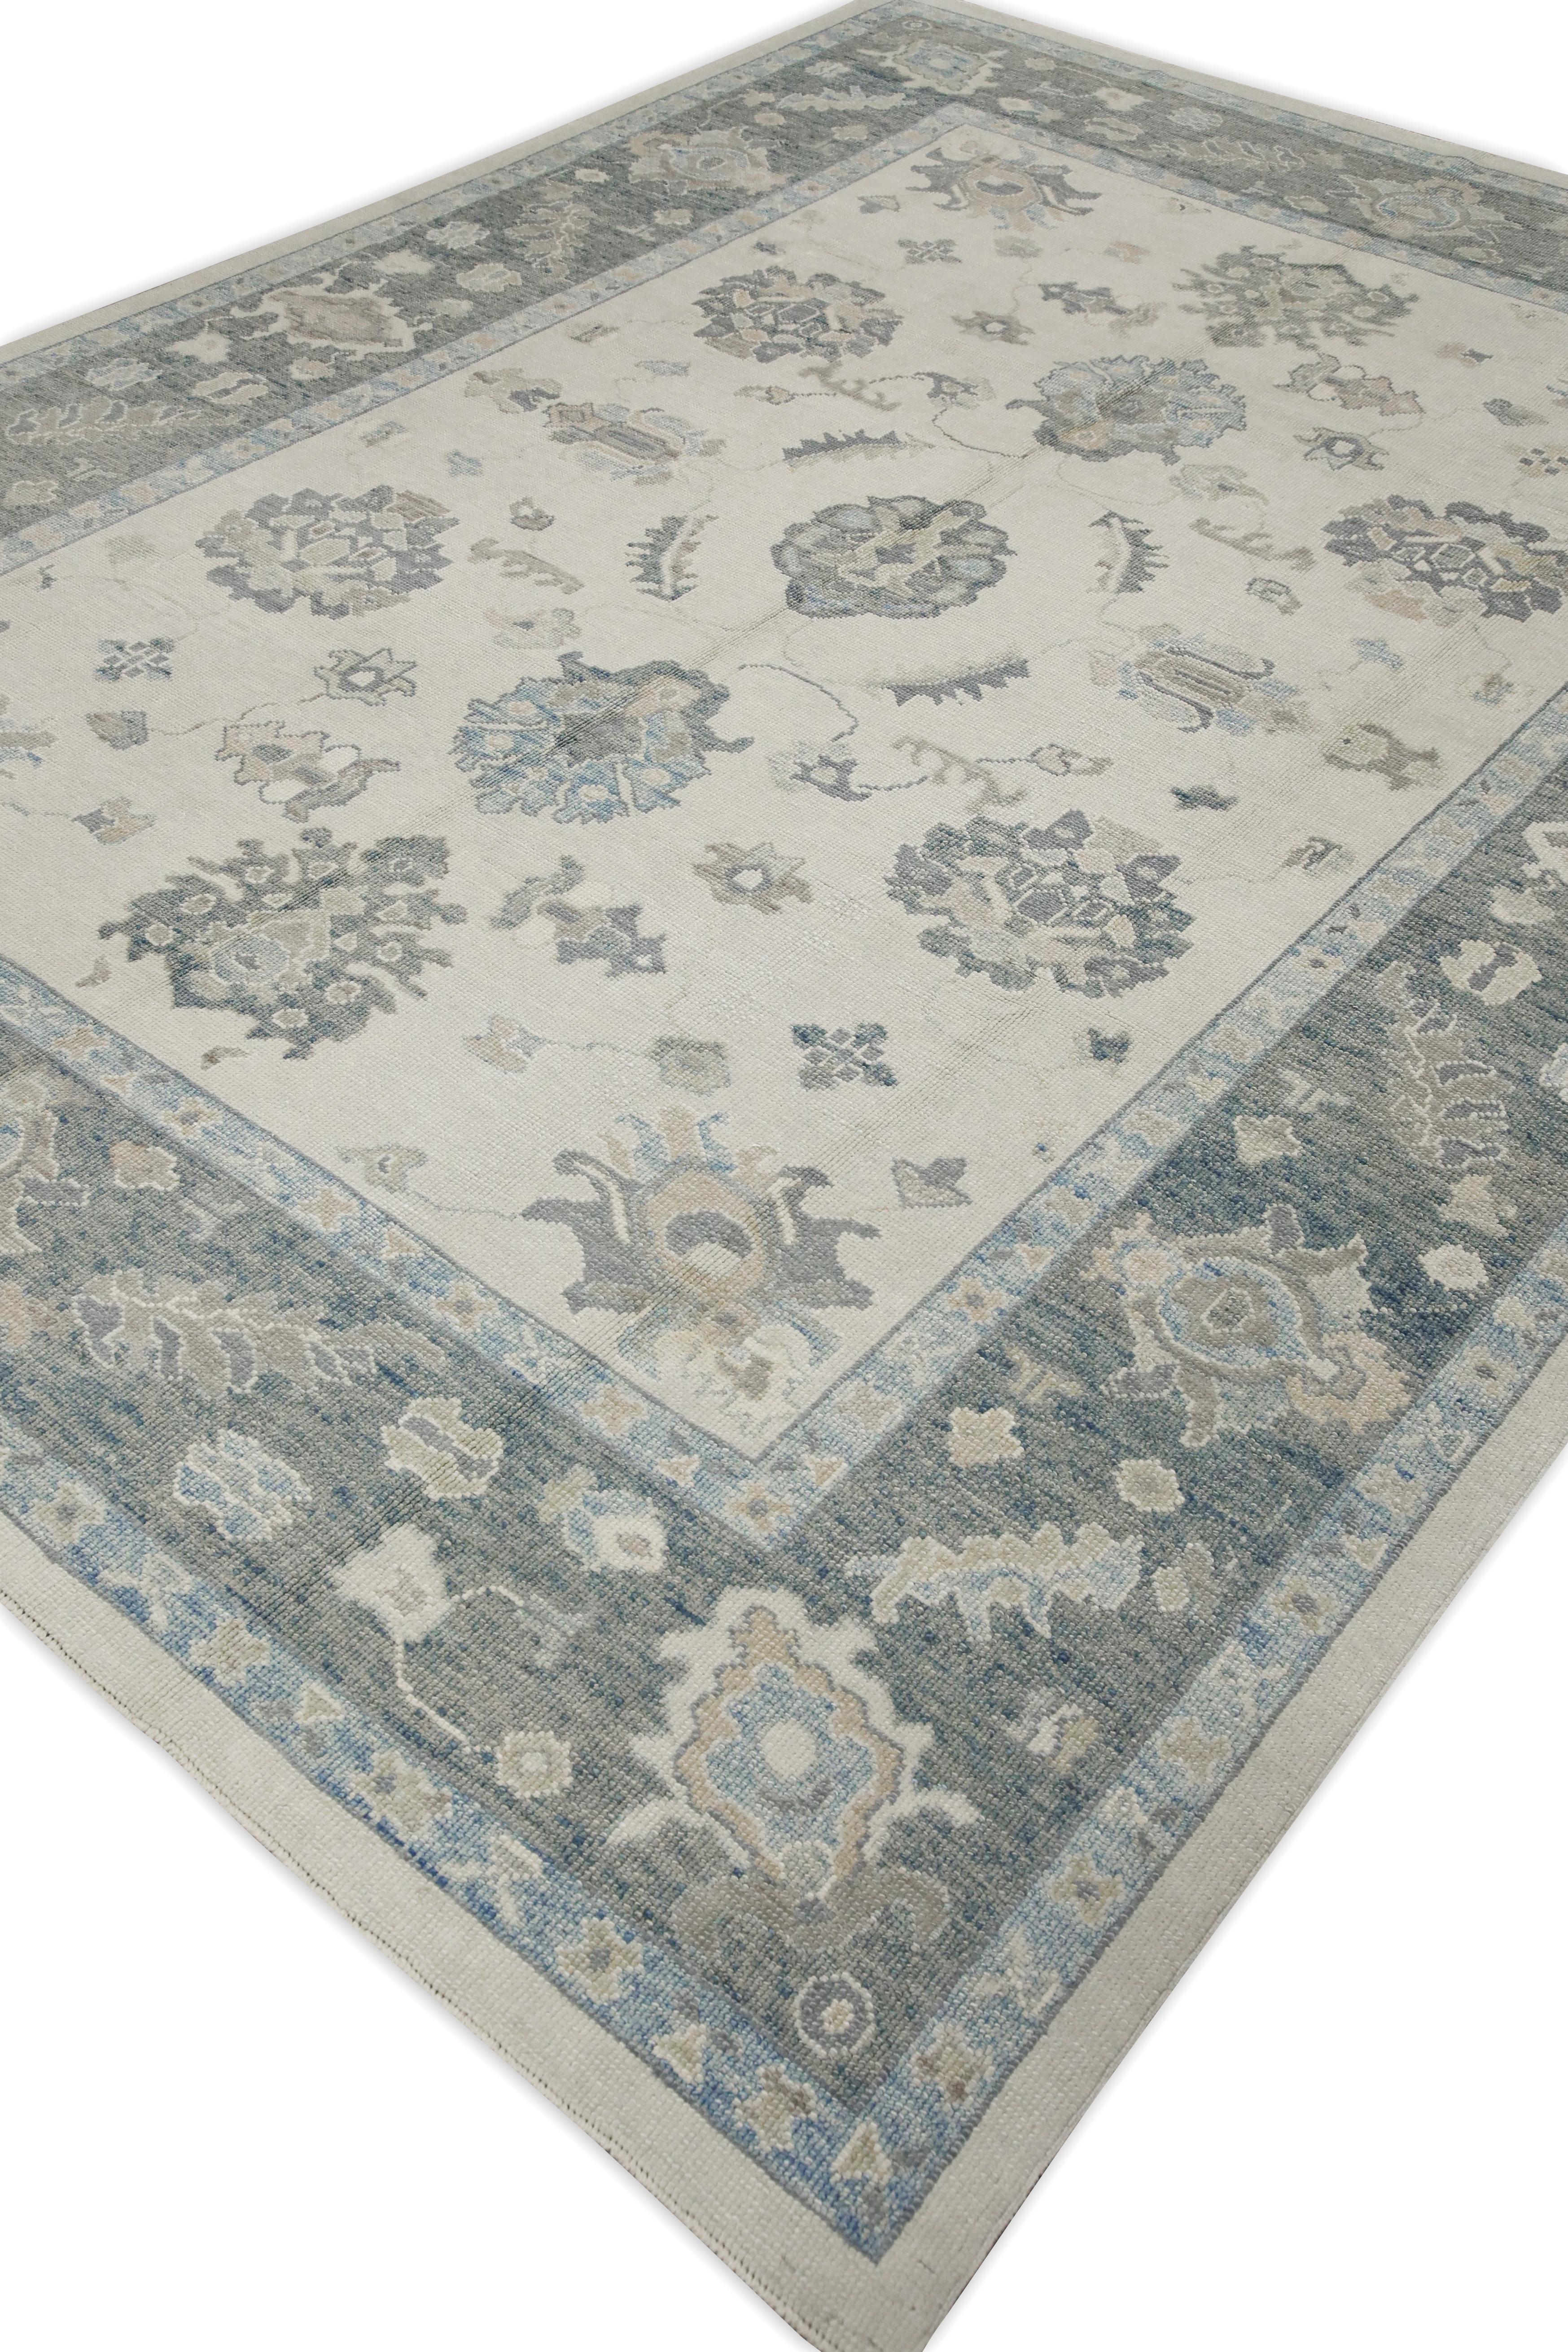 Contemporary Cream & Gray Floral Design Handwoven Wool Turkish Oushak Rug 8'9